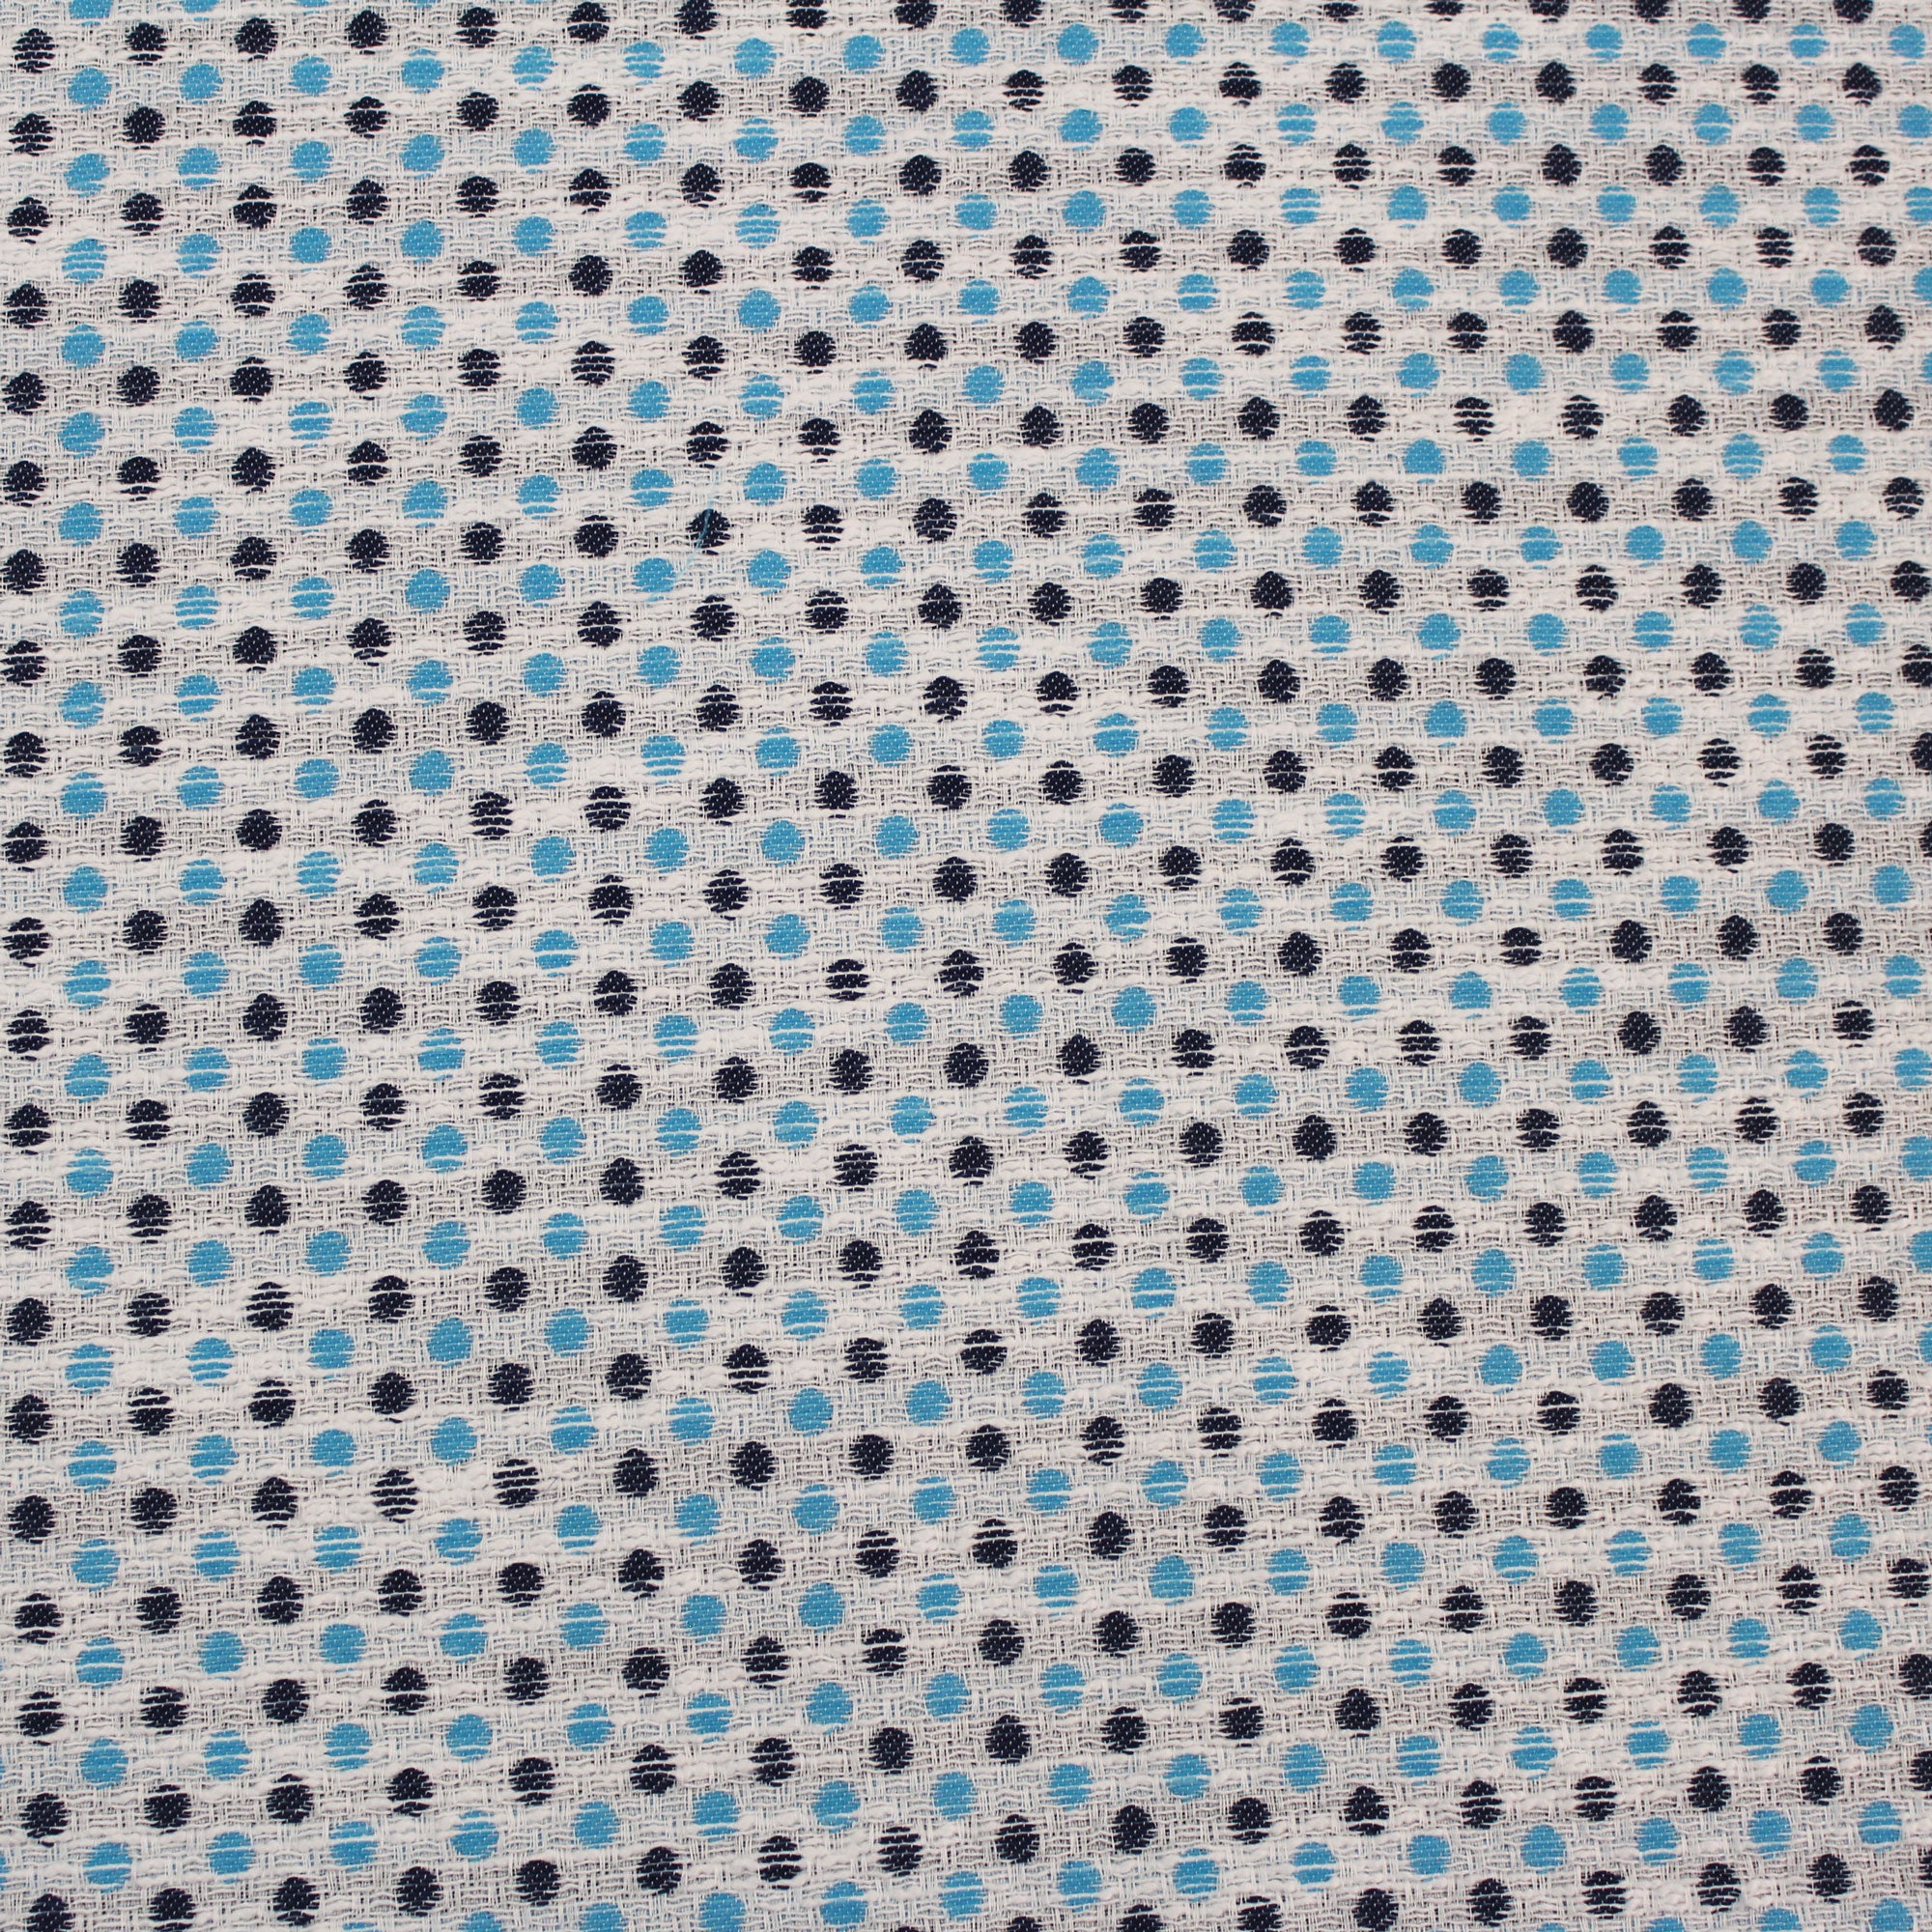 Cotton jacquard fabric with sky blue and navy polka dots